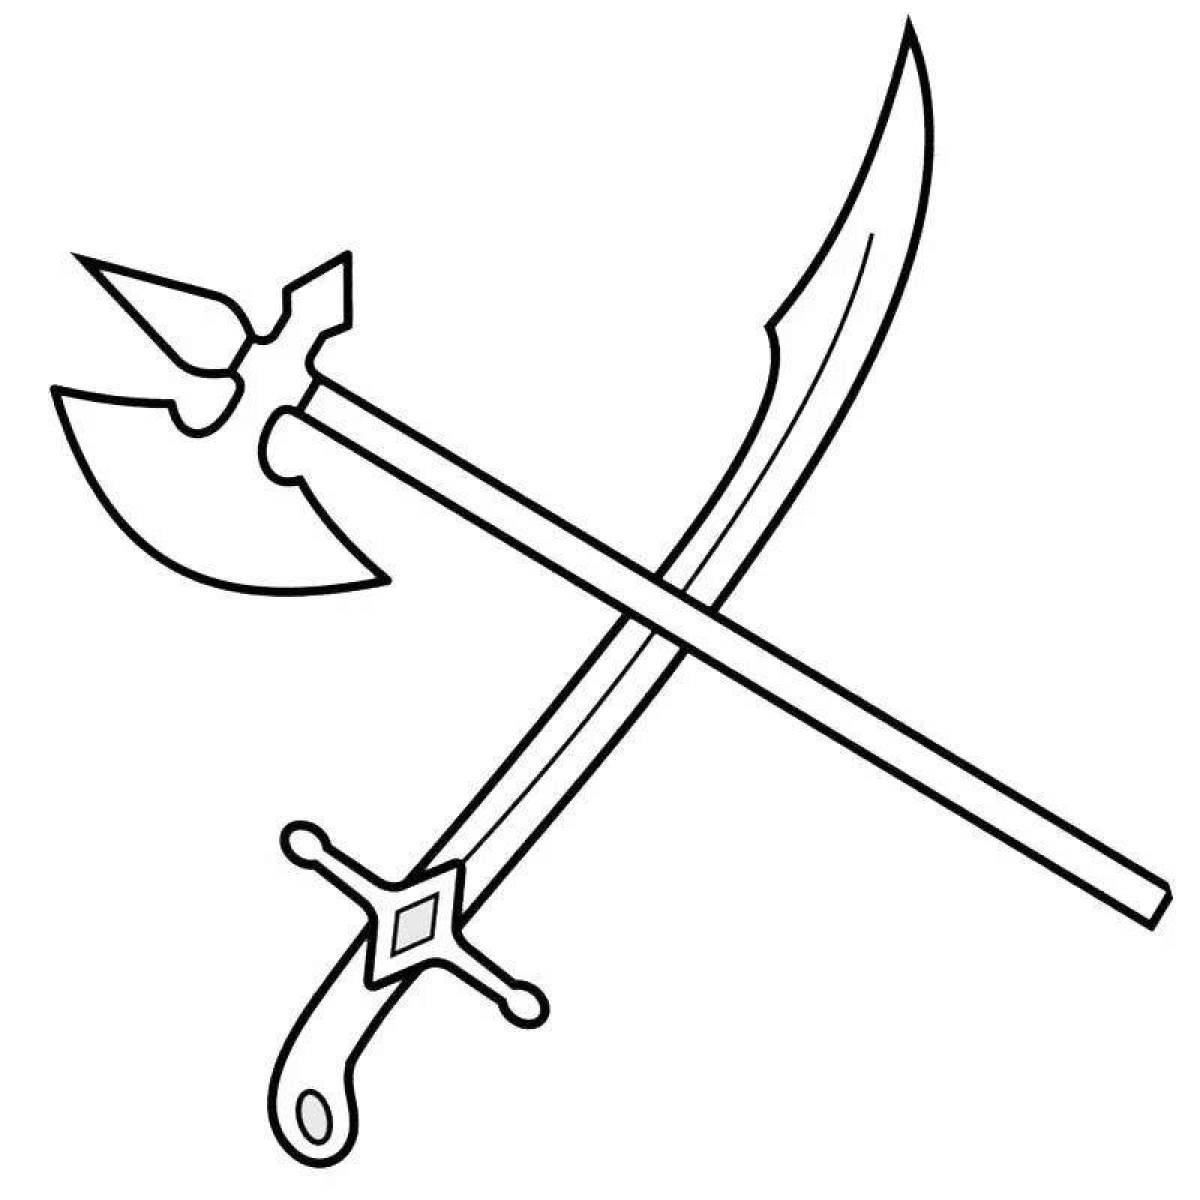 Shiny sword coloring book for kids